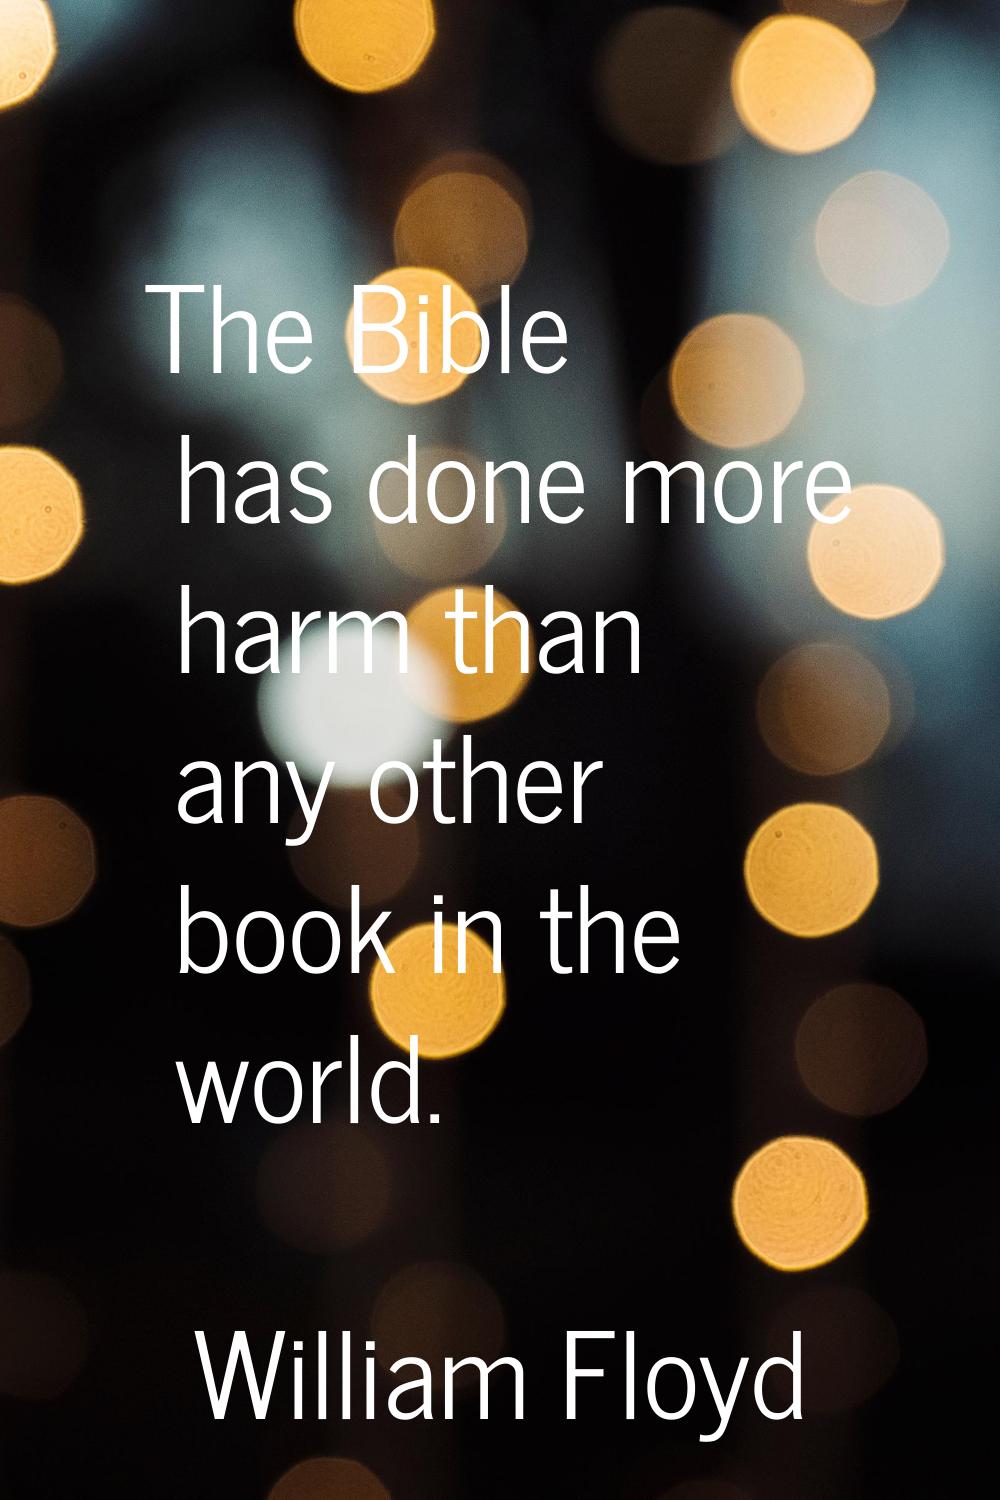 The Bible has done more harm than any other book in the world.